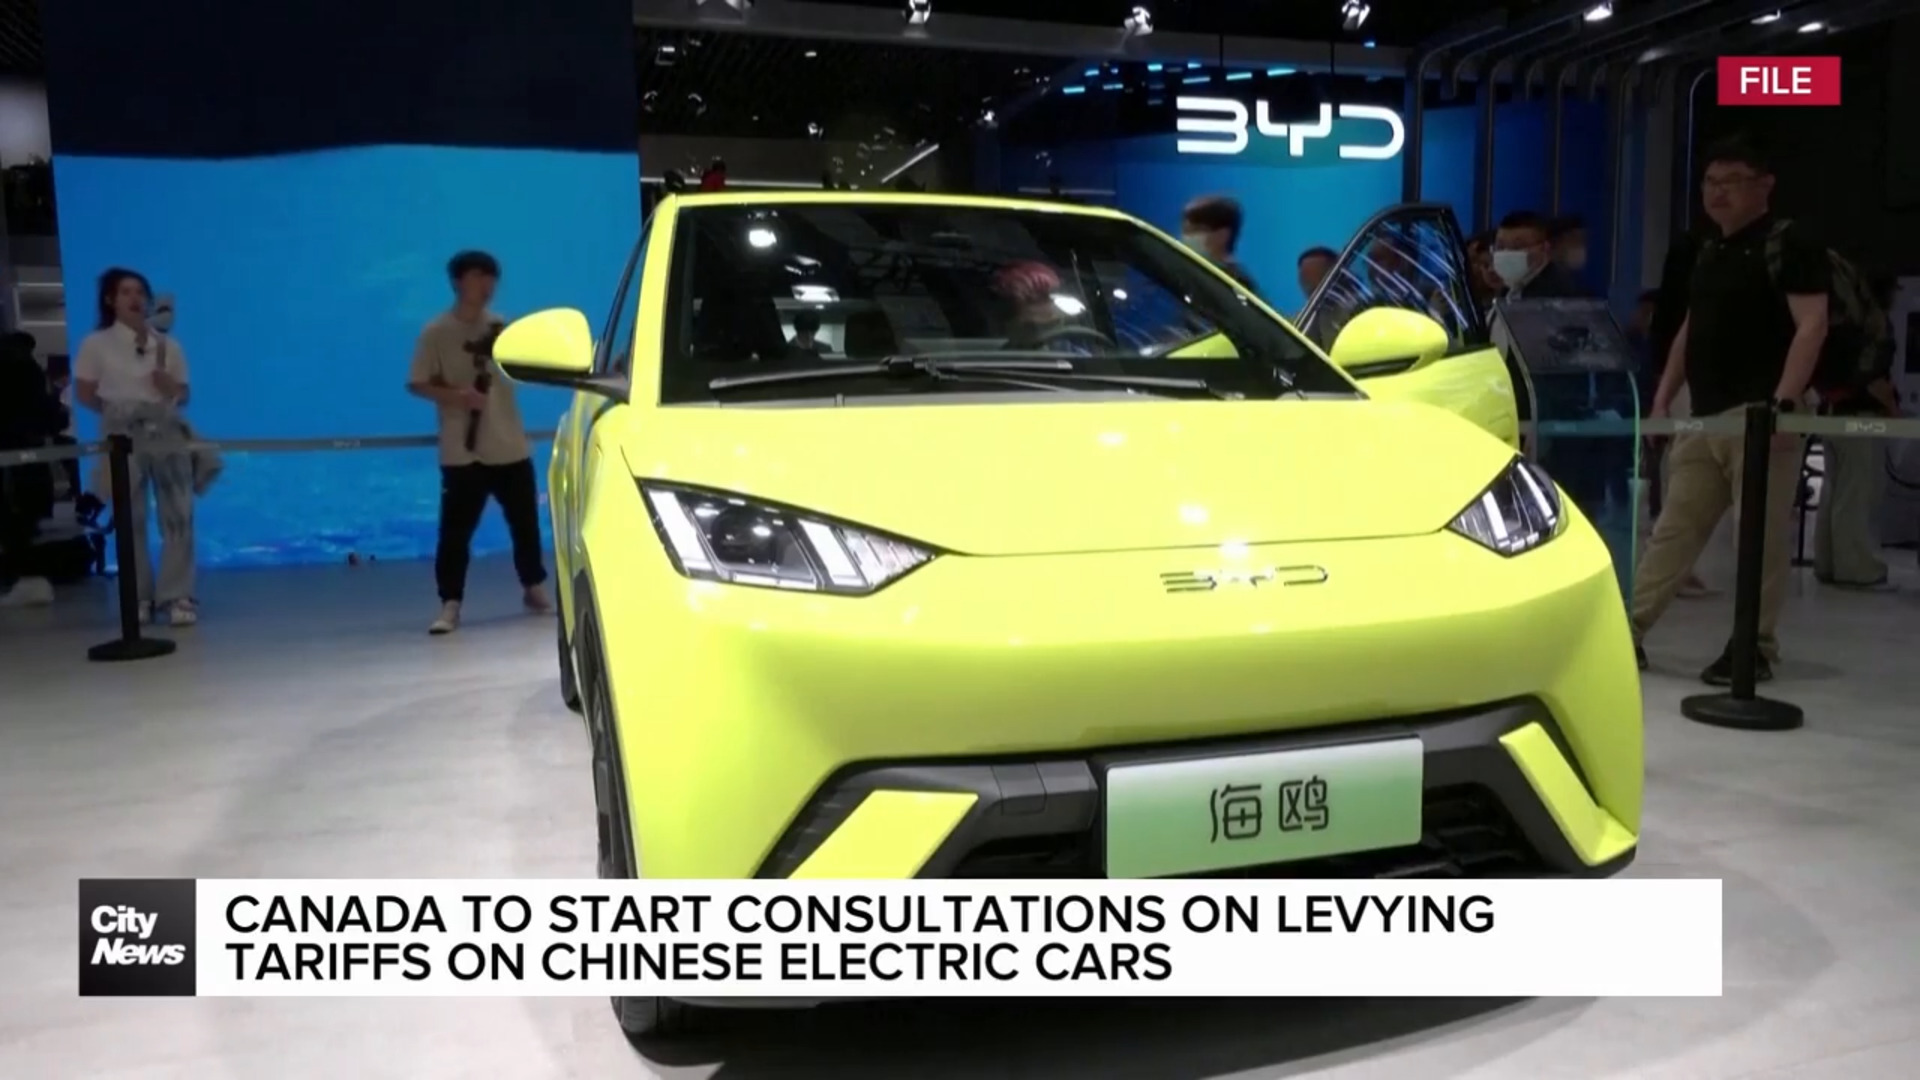 Canada to consult on tariffs on Chinese EV’s